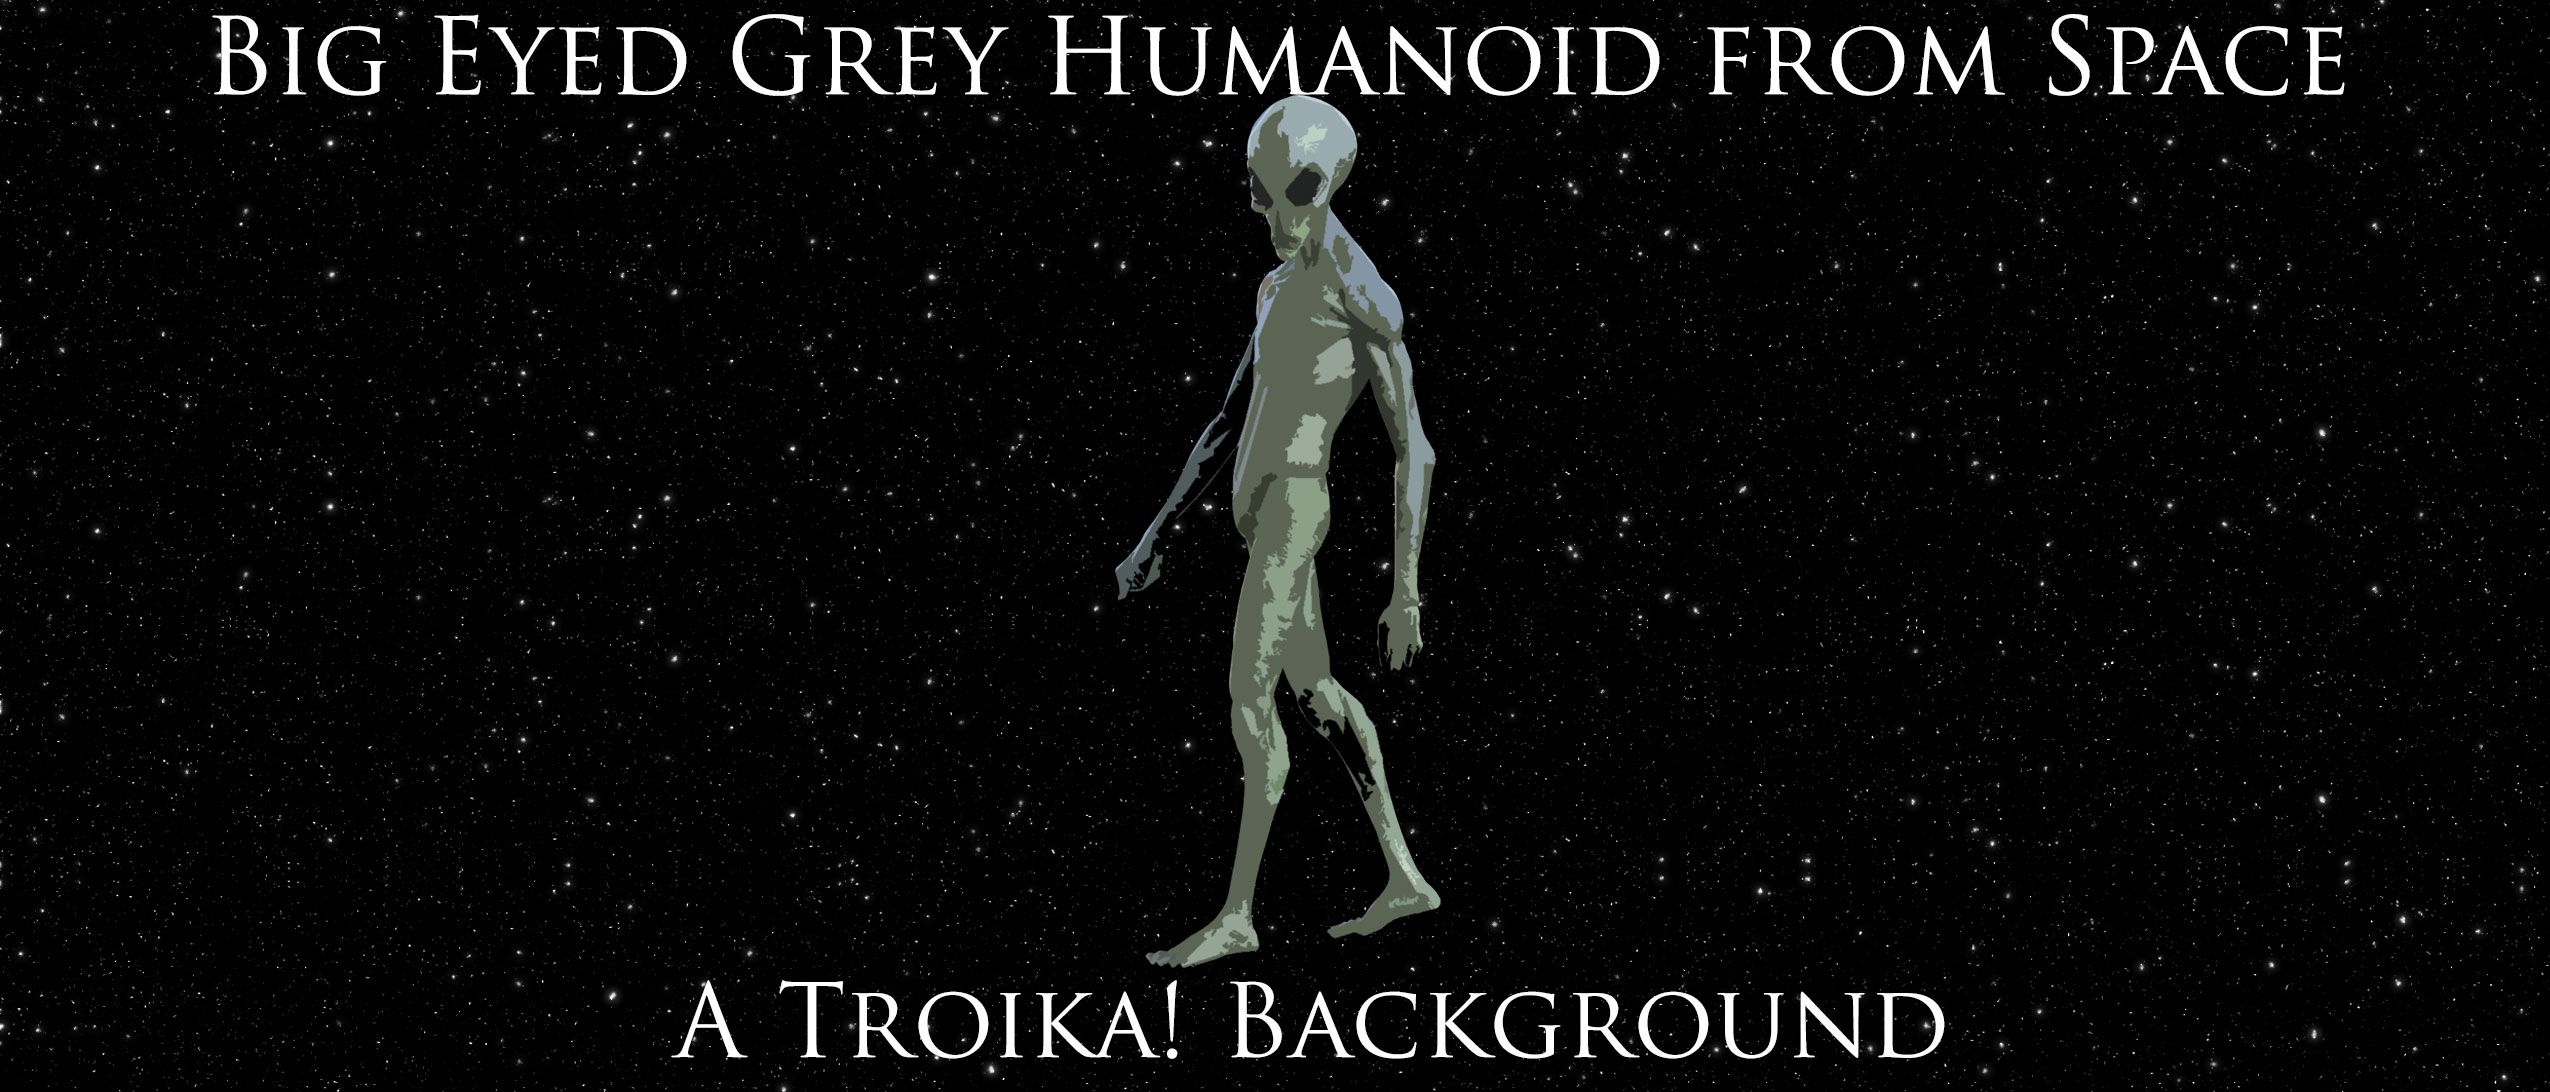 Big Eyed Grey Humanoid from Space - A Troika! Background